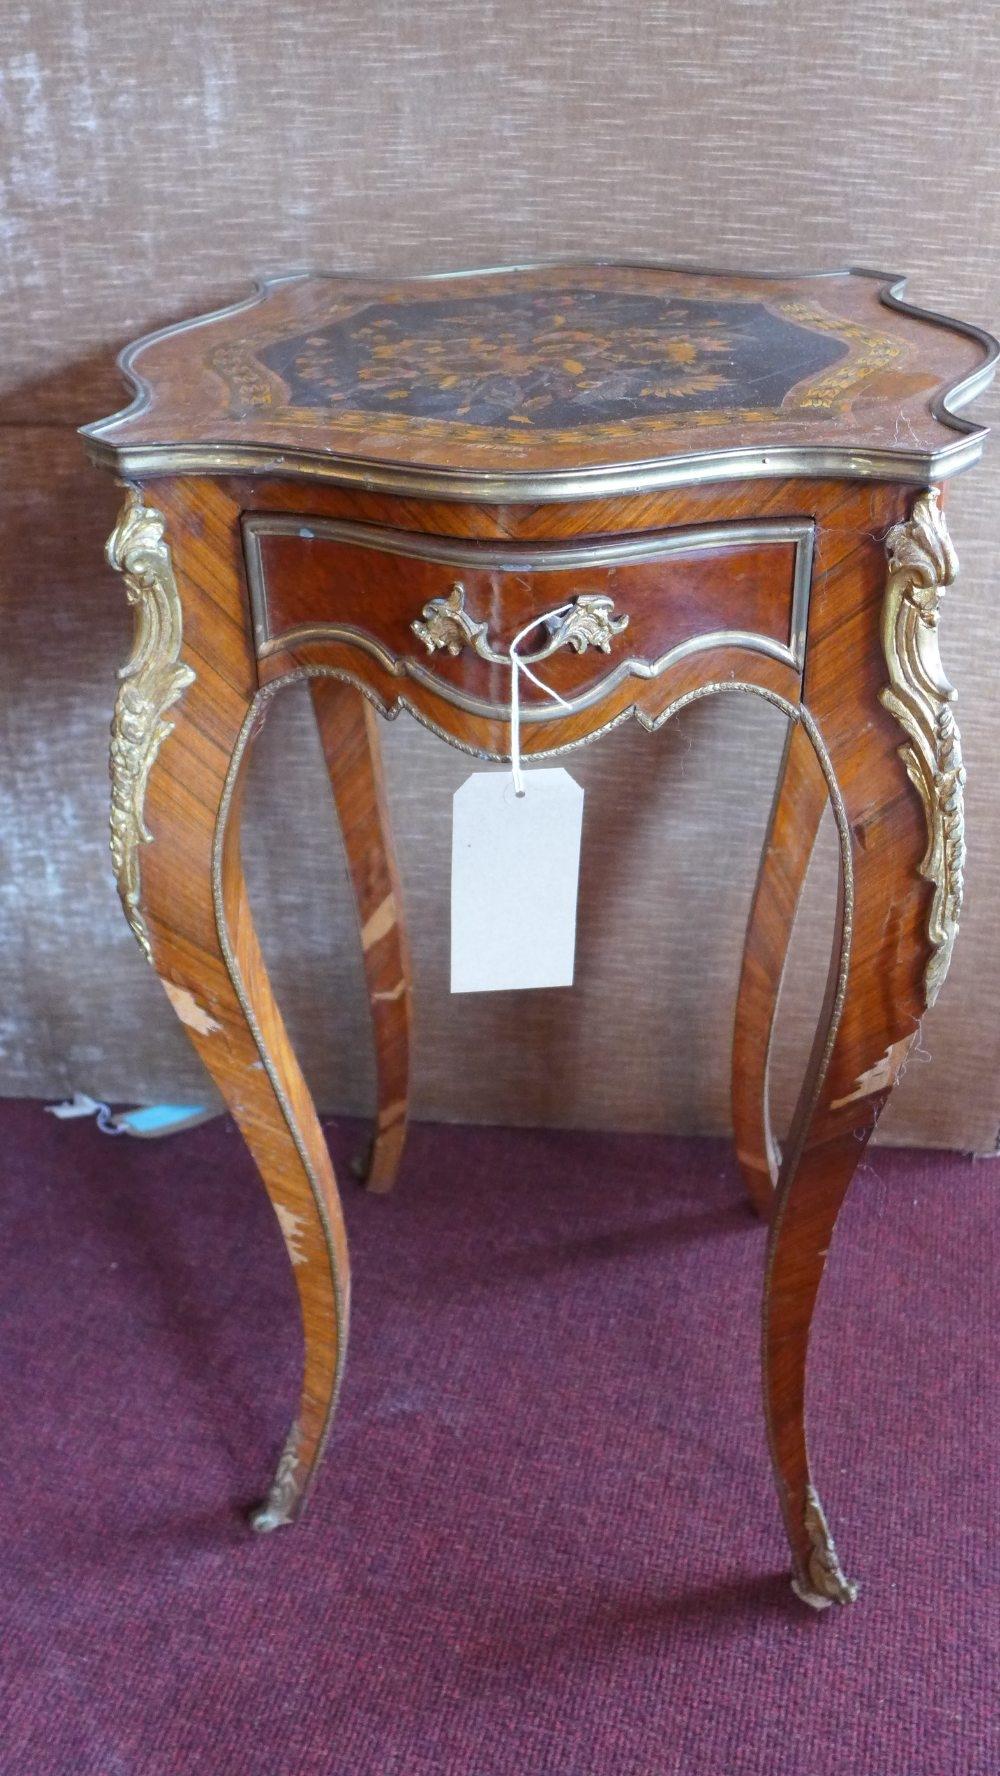 An early 20th century Louis XV style walnut lamp table, with marquetry inlay, having ormolu